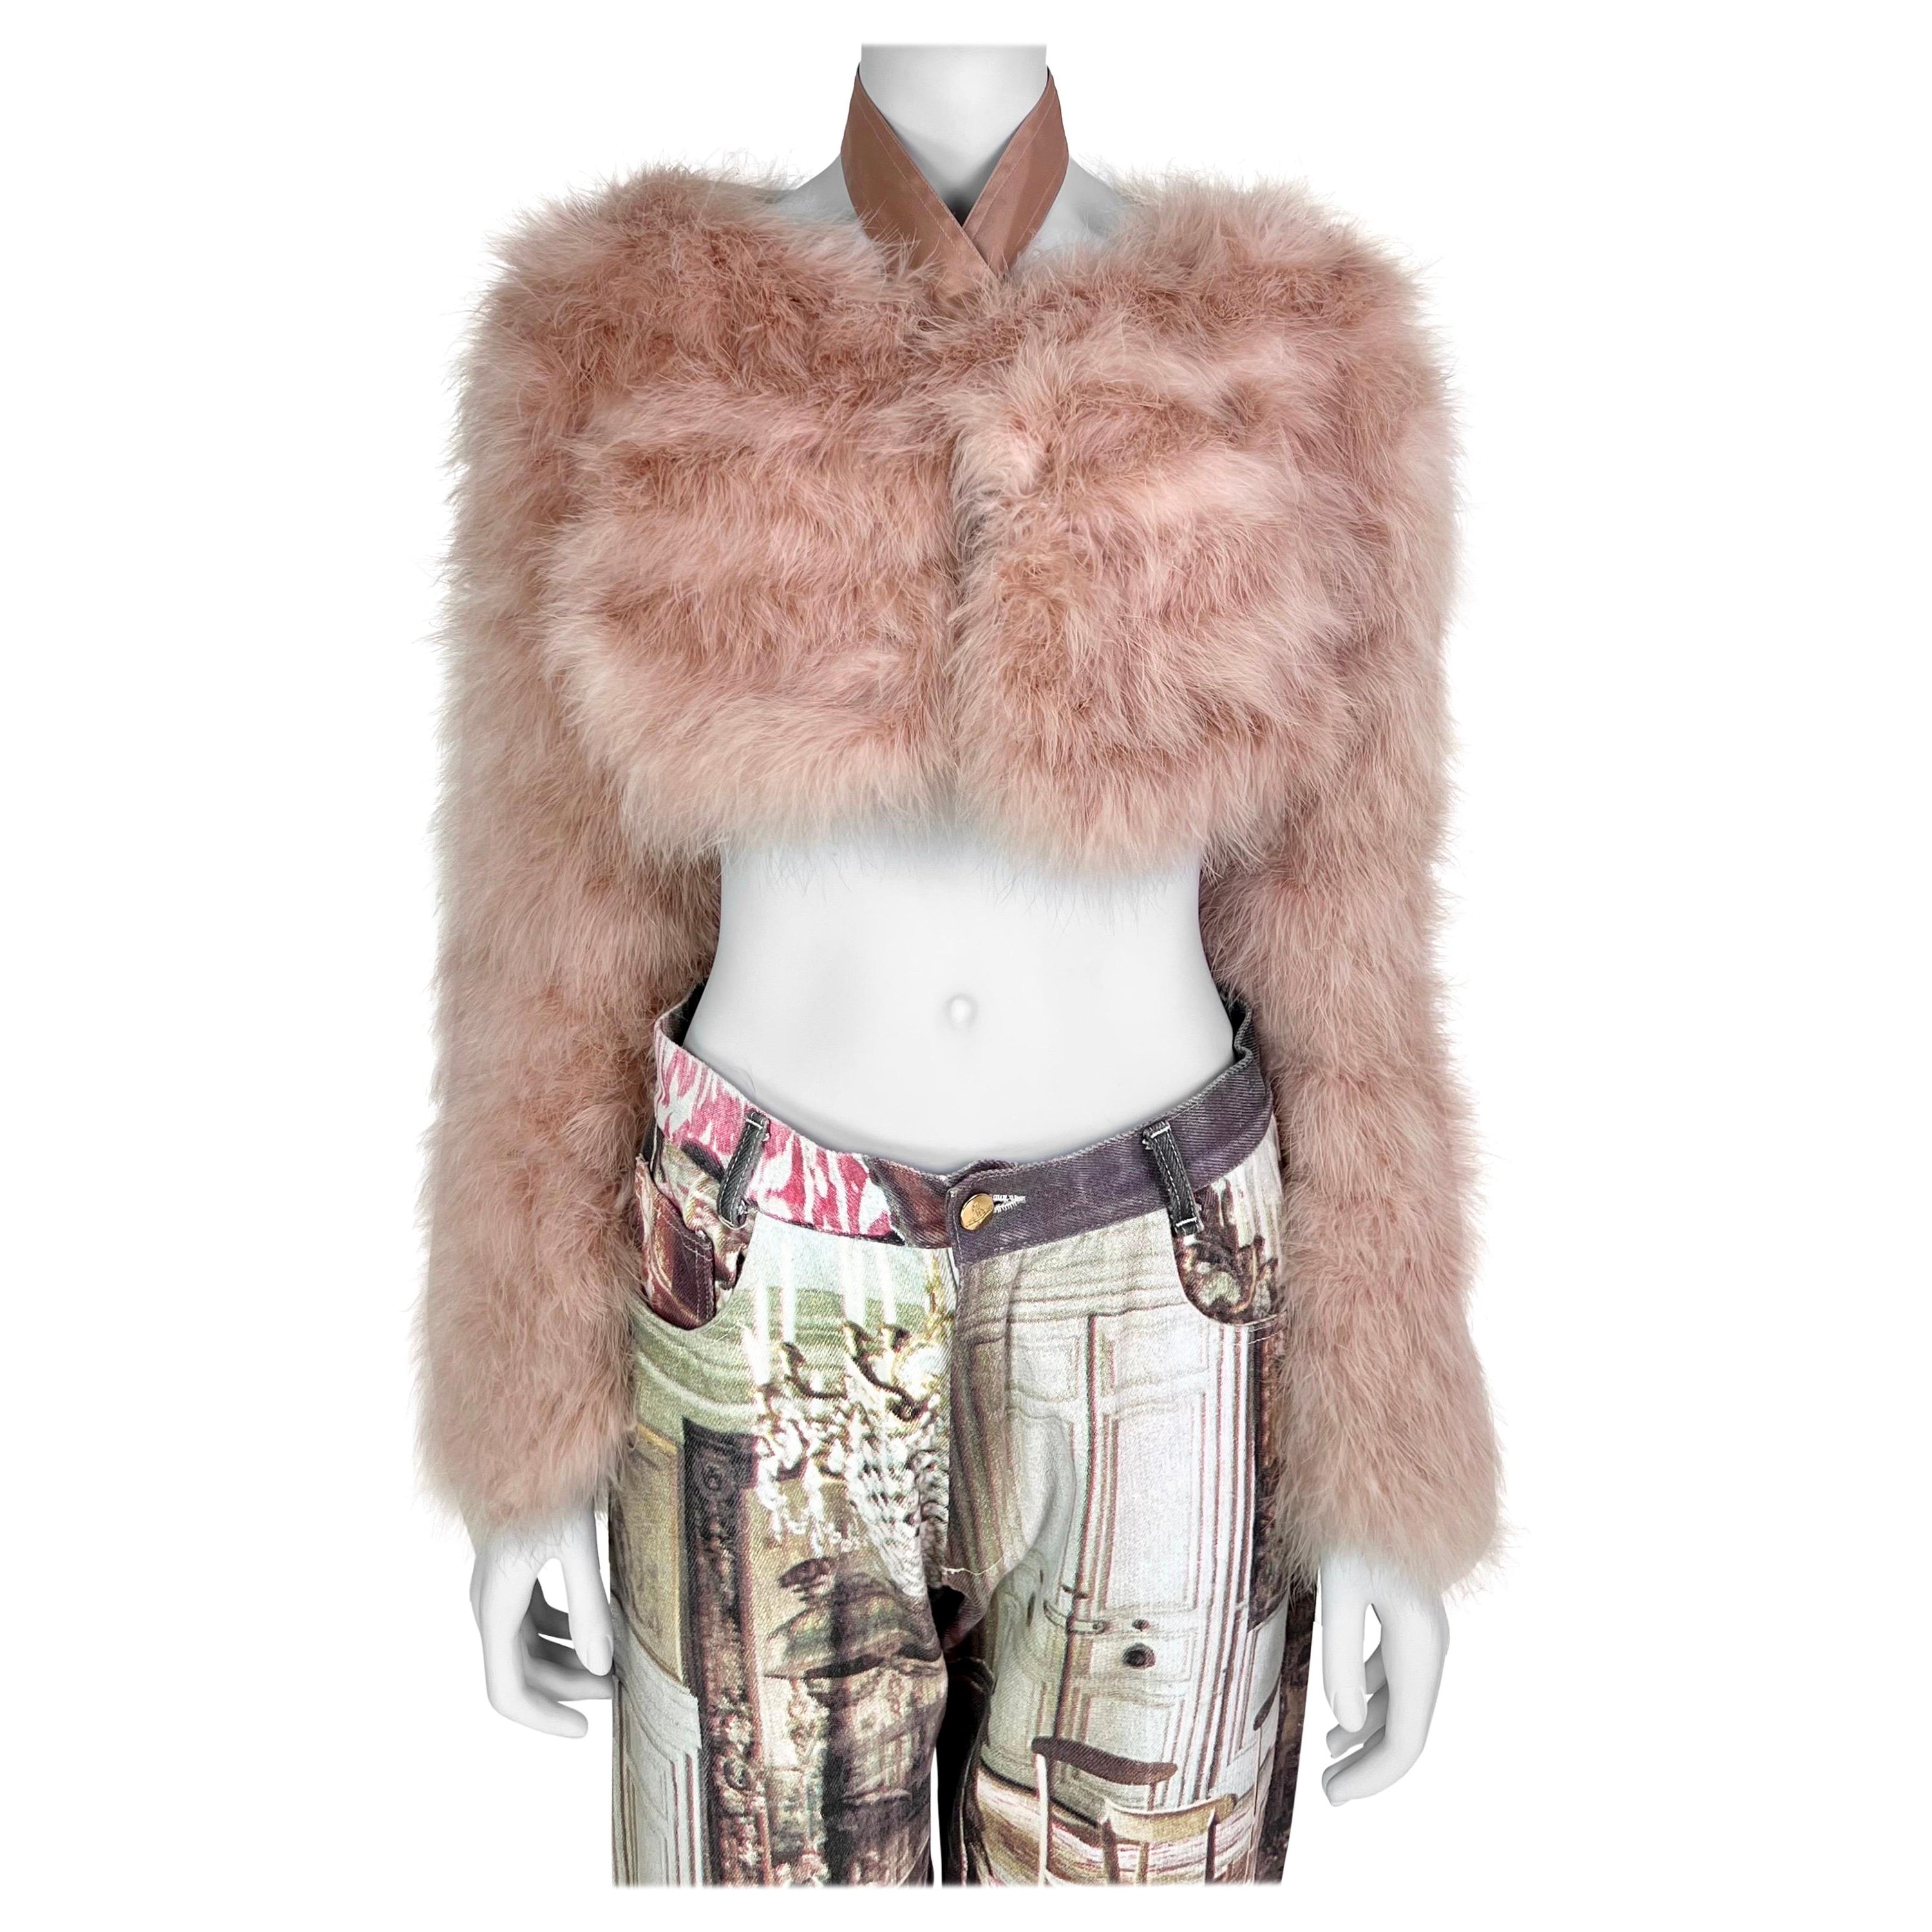 Gucci by Tom Ford Spring 2004 Blush Pink Marabout Feather Bolero Jacket